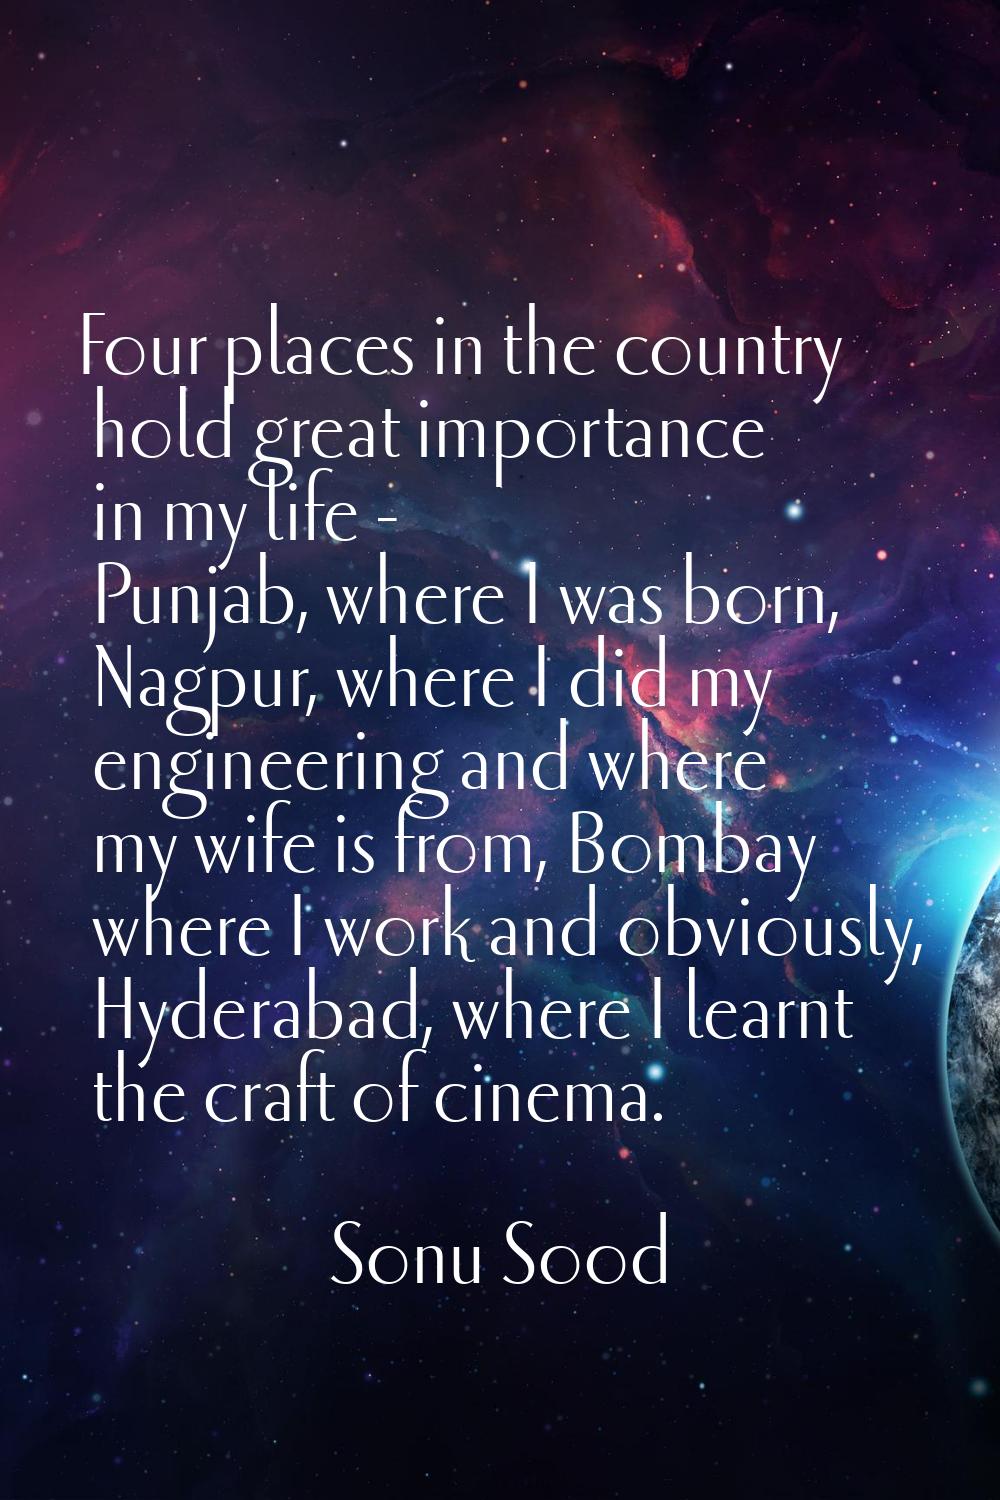 Four places in the country hold great importance in my life - Punjab, where I was born, Nagpur, whe